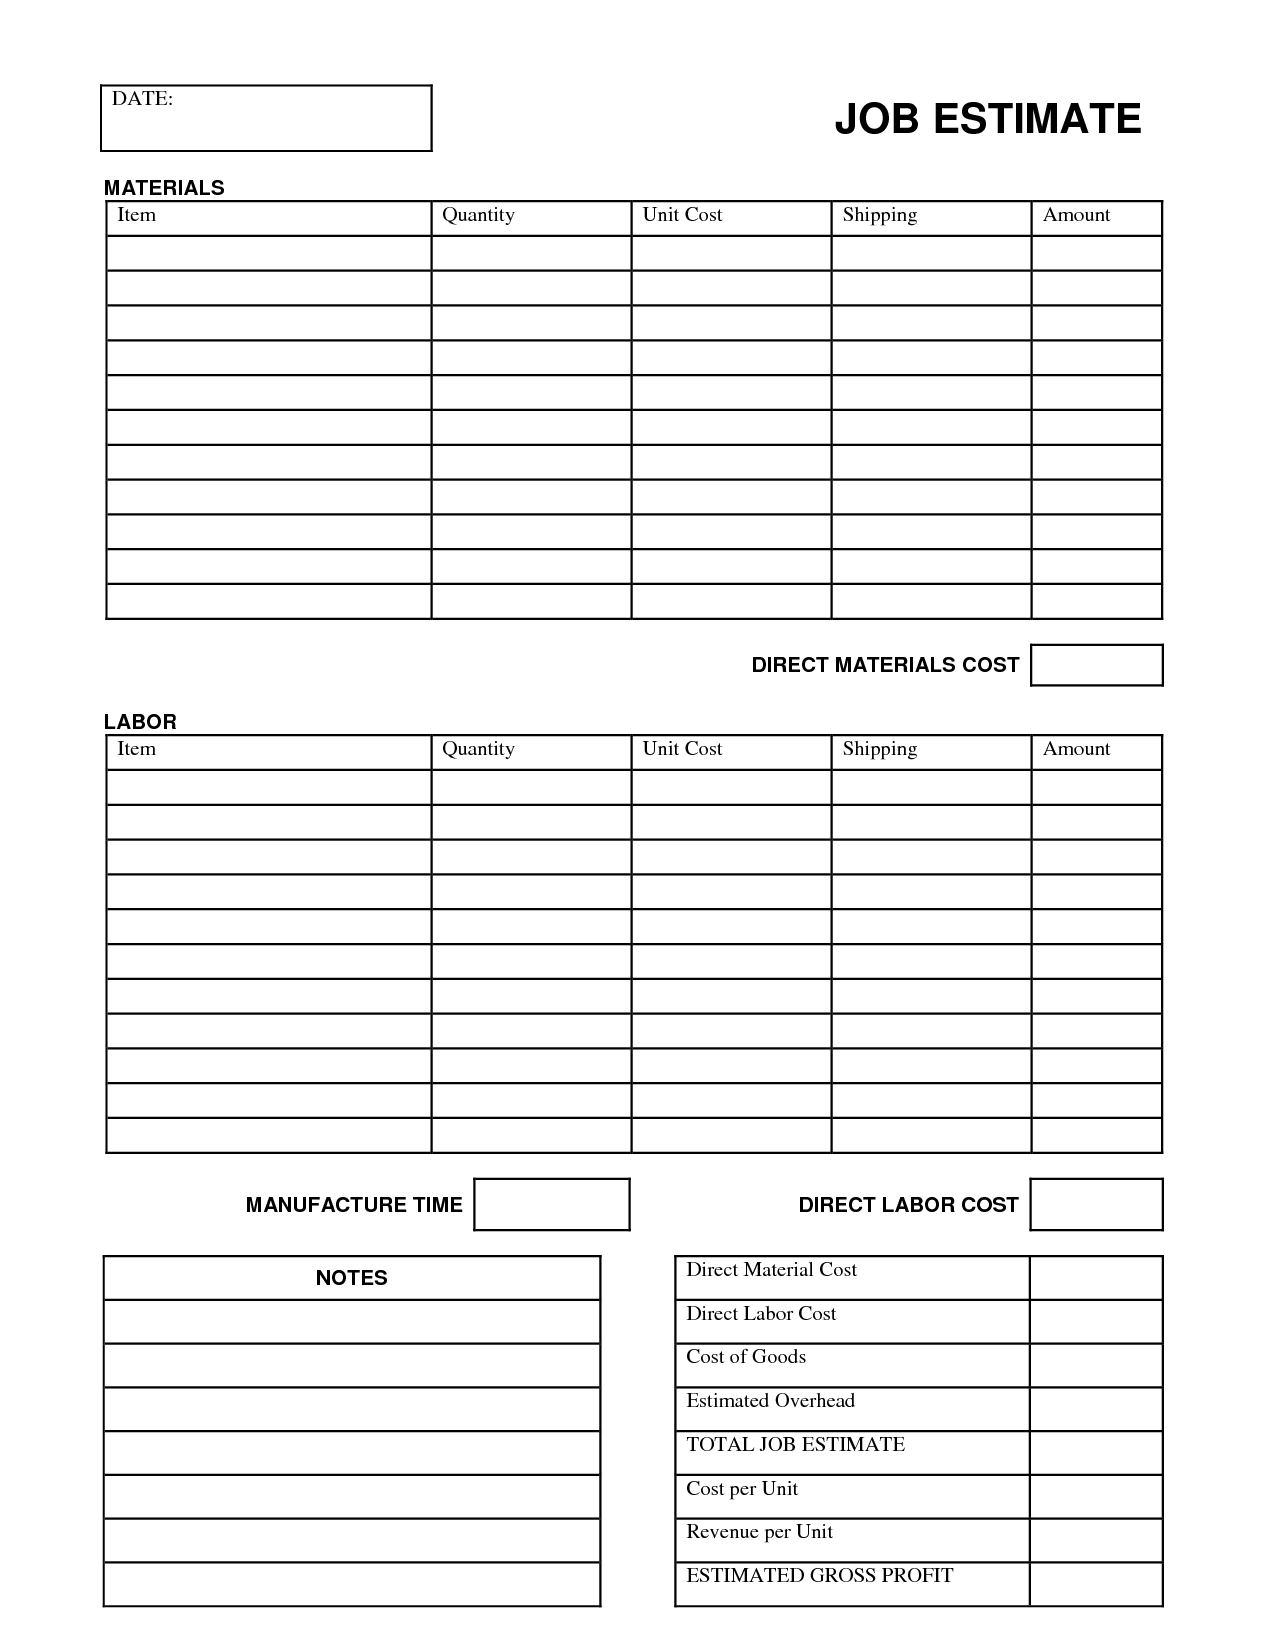 Printable Job Estimate Forms | Job Estimate Free Office Form Within Blank Estimate Form Template